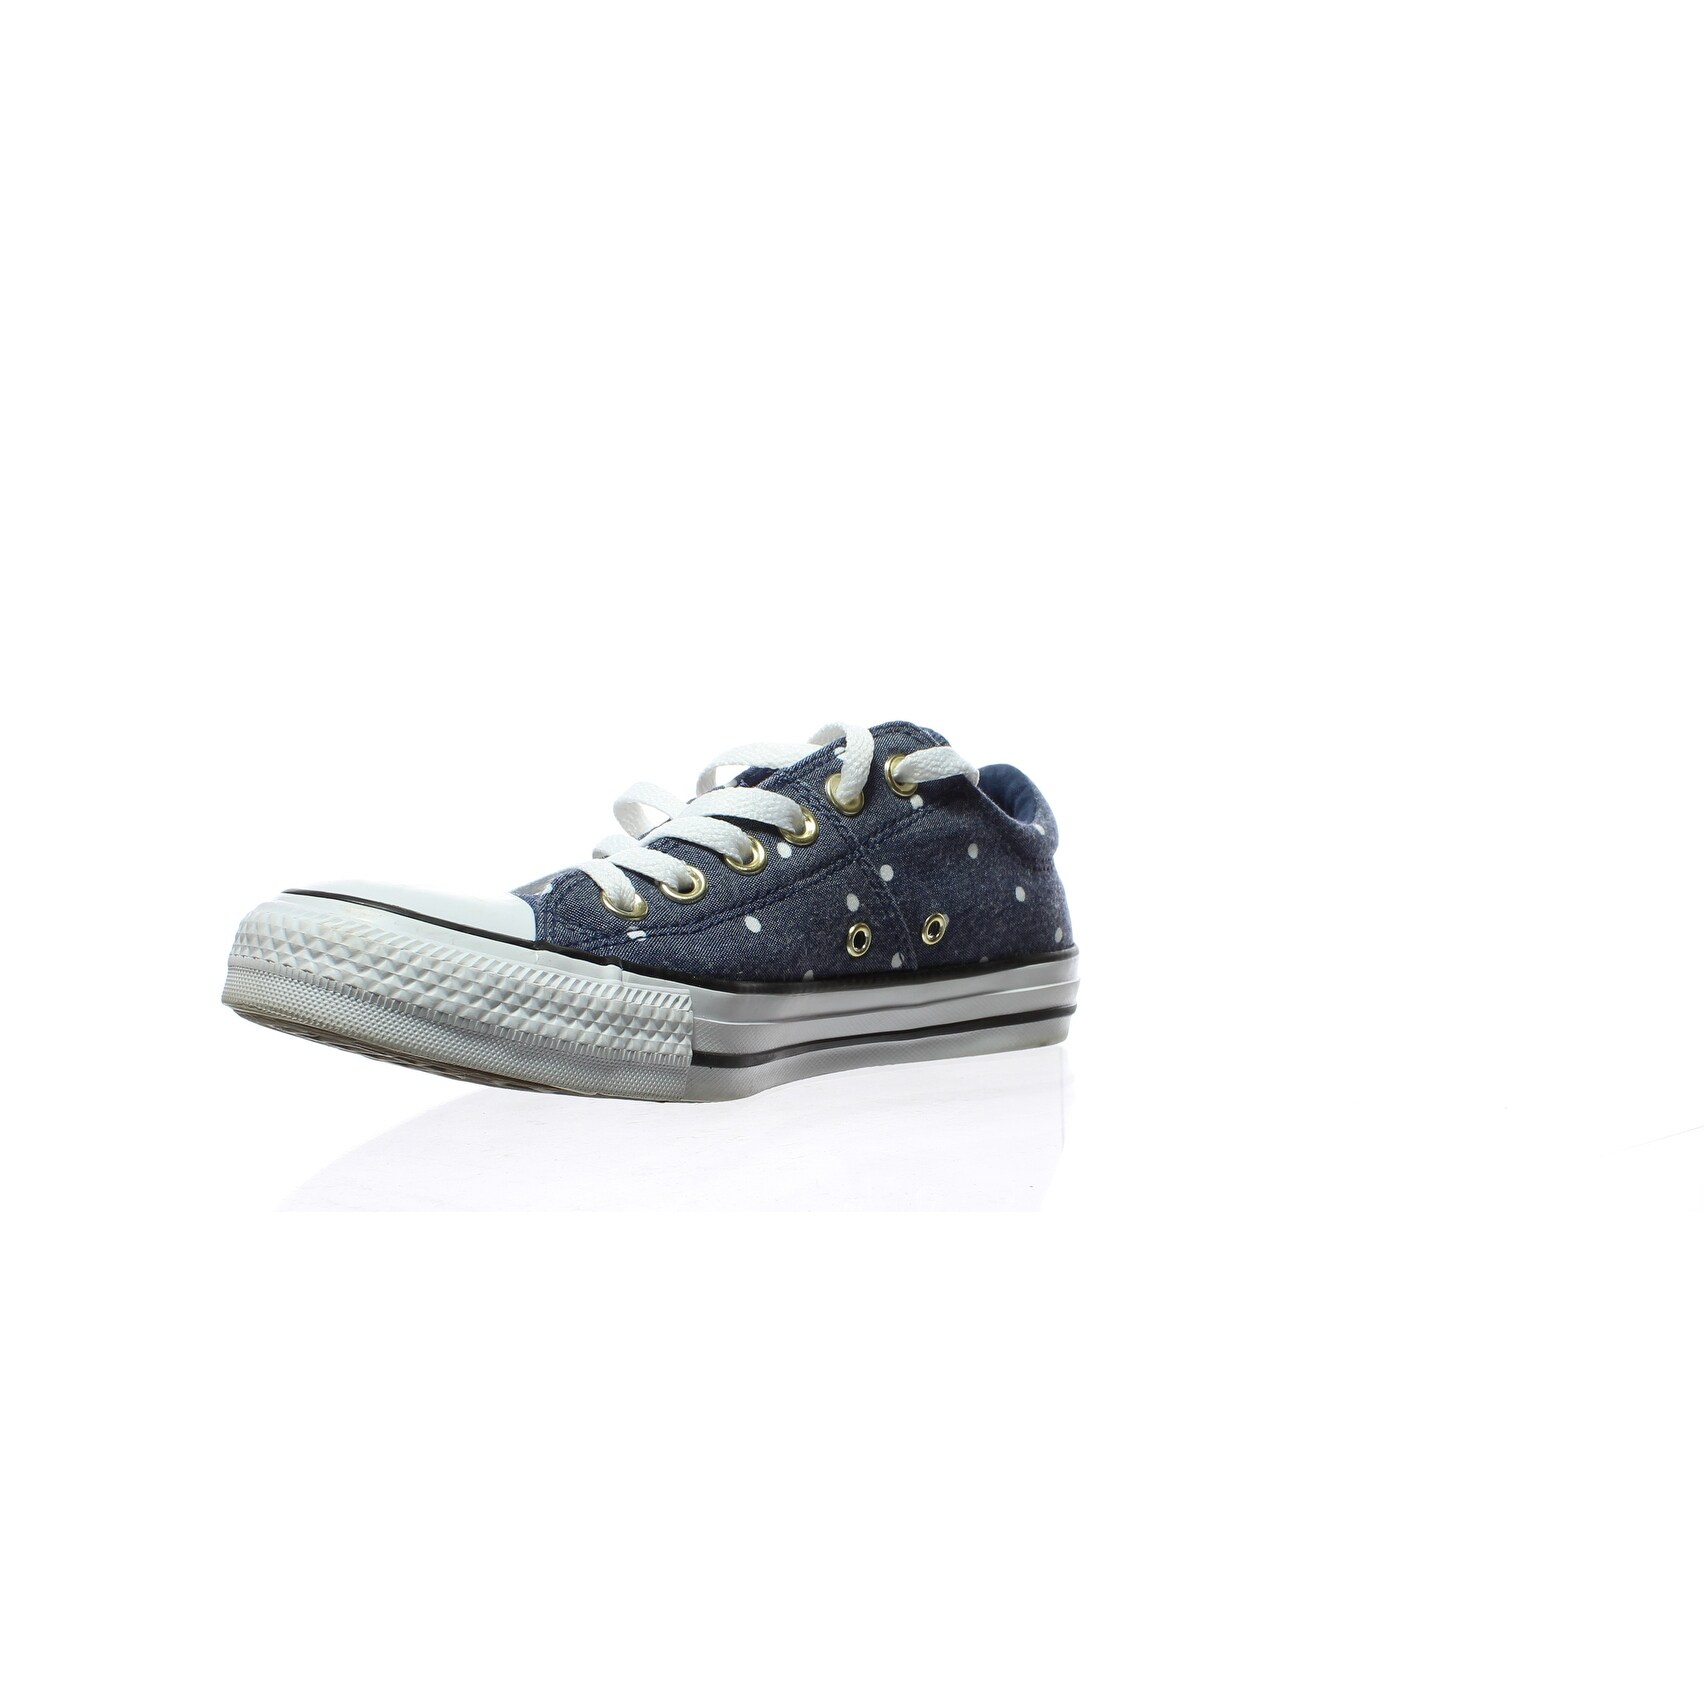 navy converse womens size 7